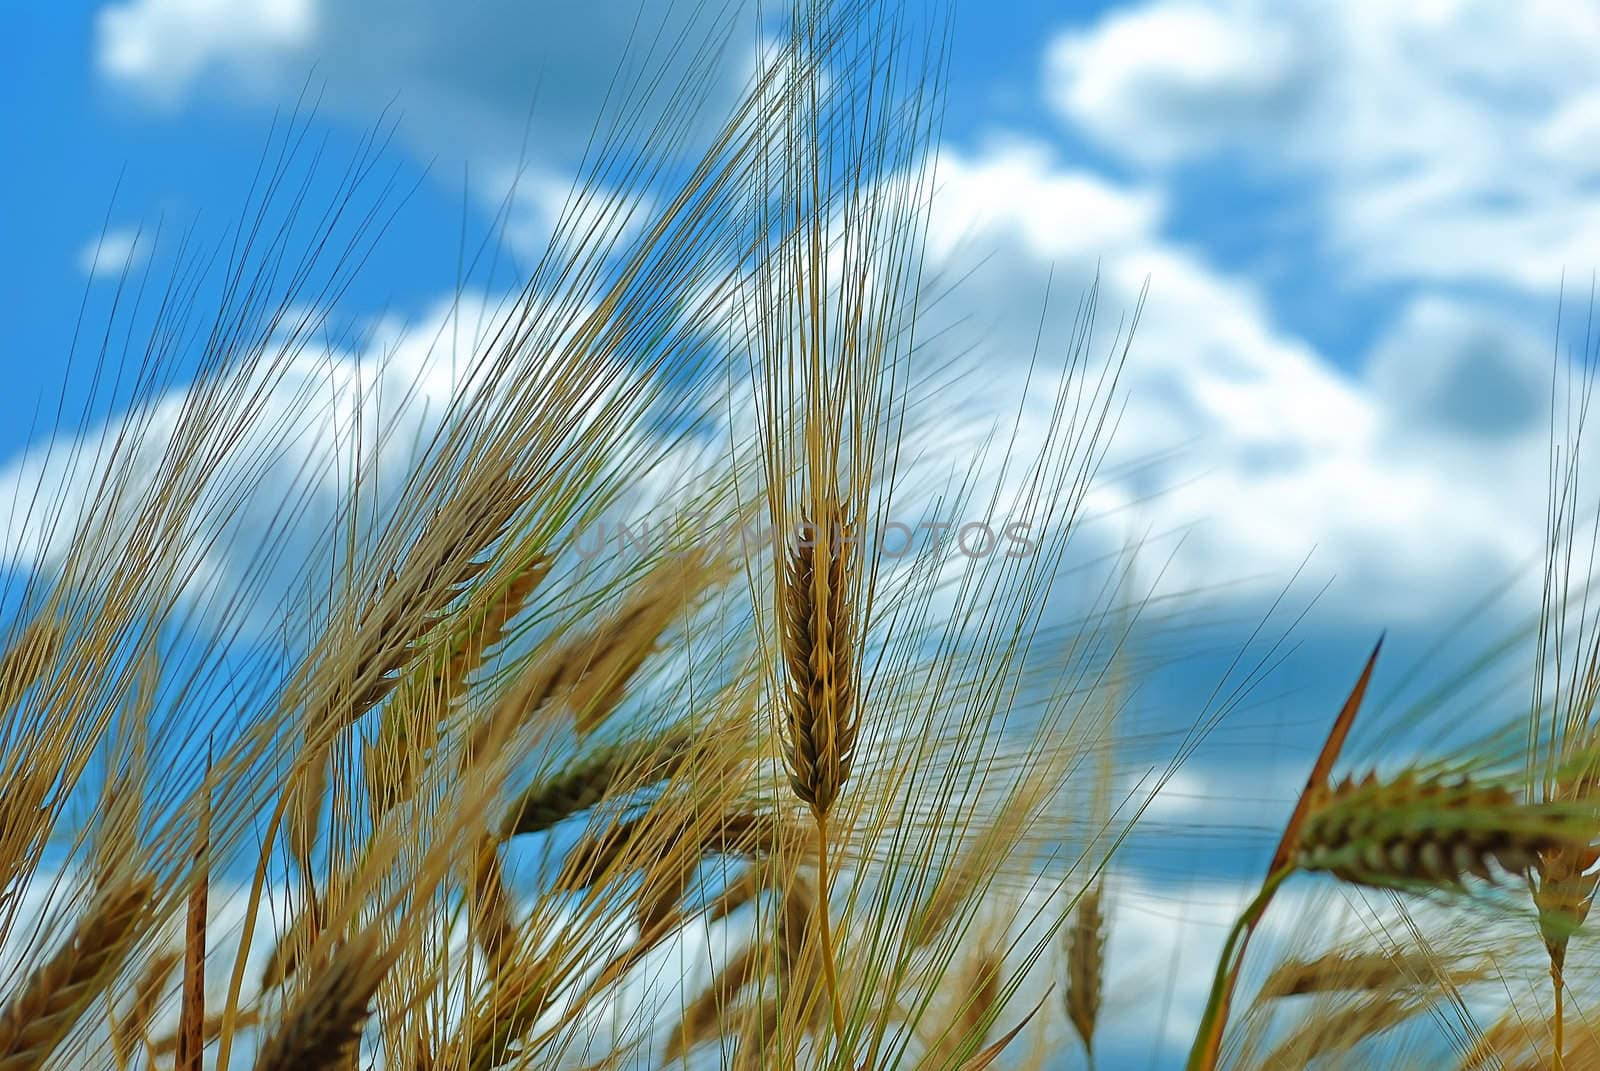 spikelets of wheat against the blue sky